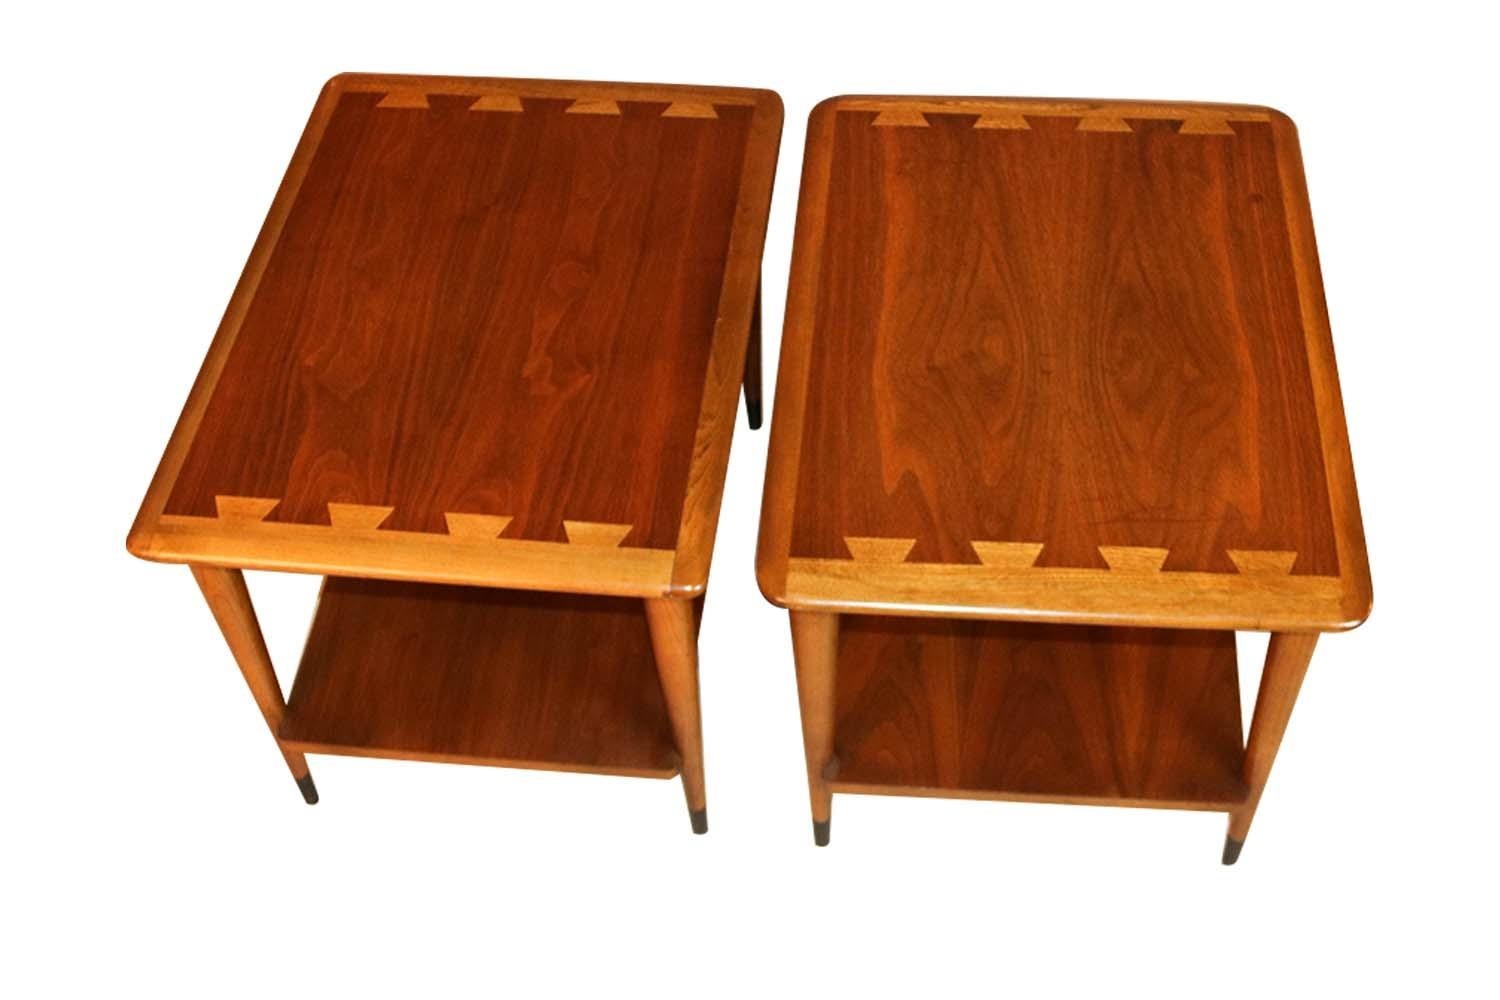 American Midcentury Lane Acclaim Dovetail End Tables, Pair